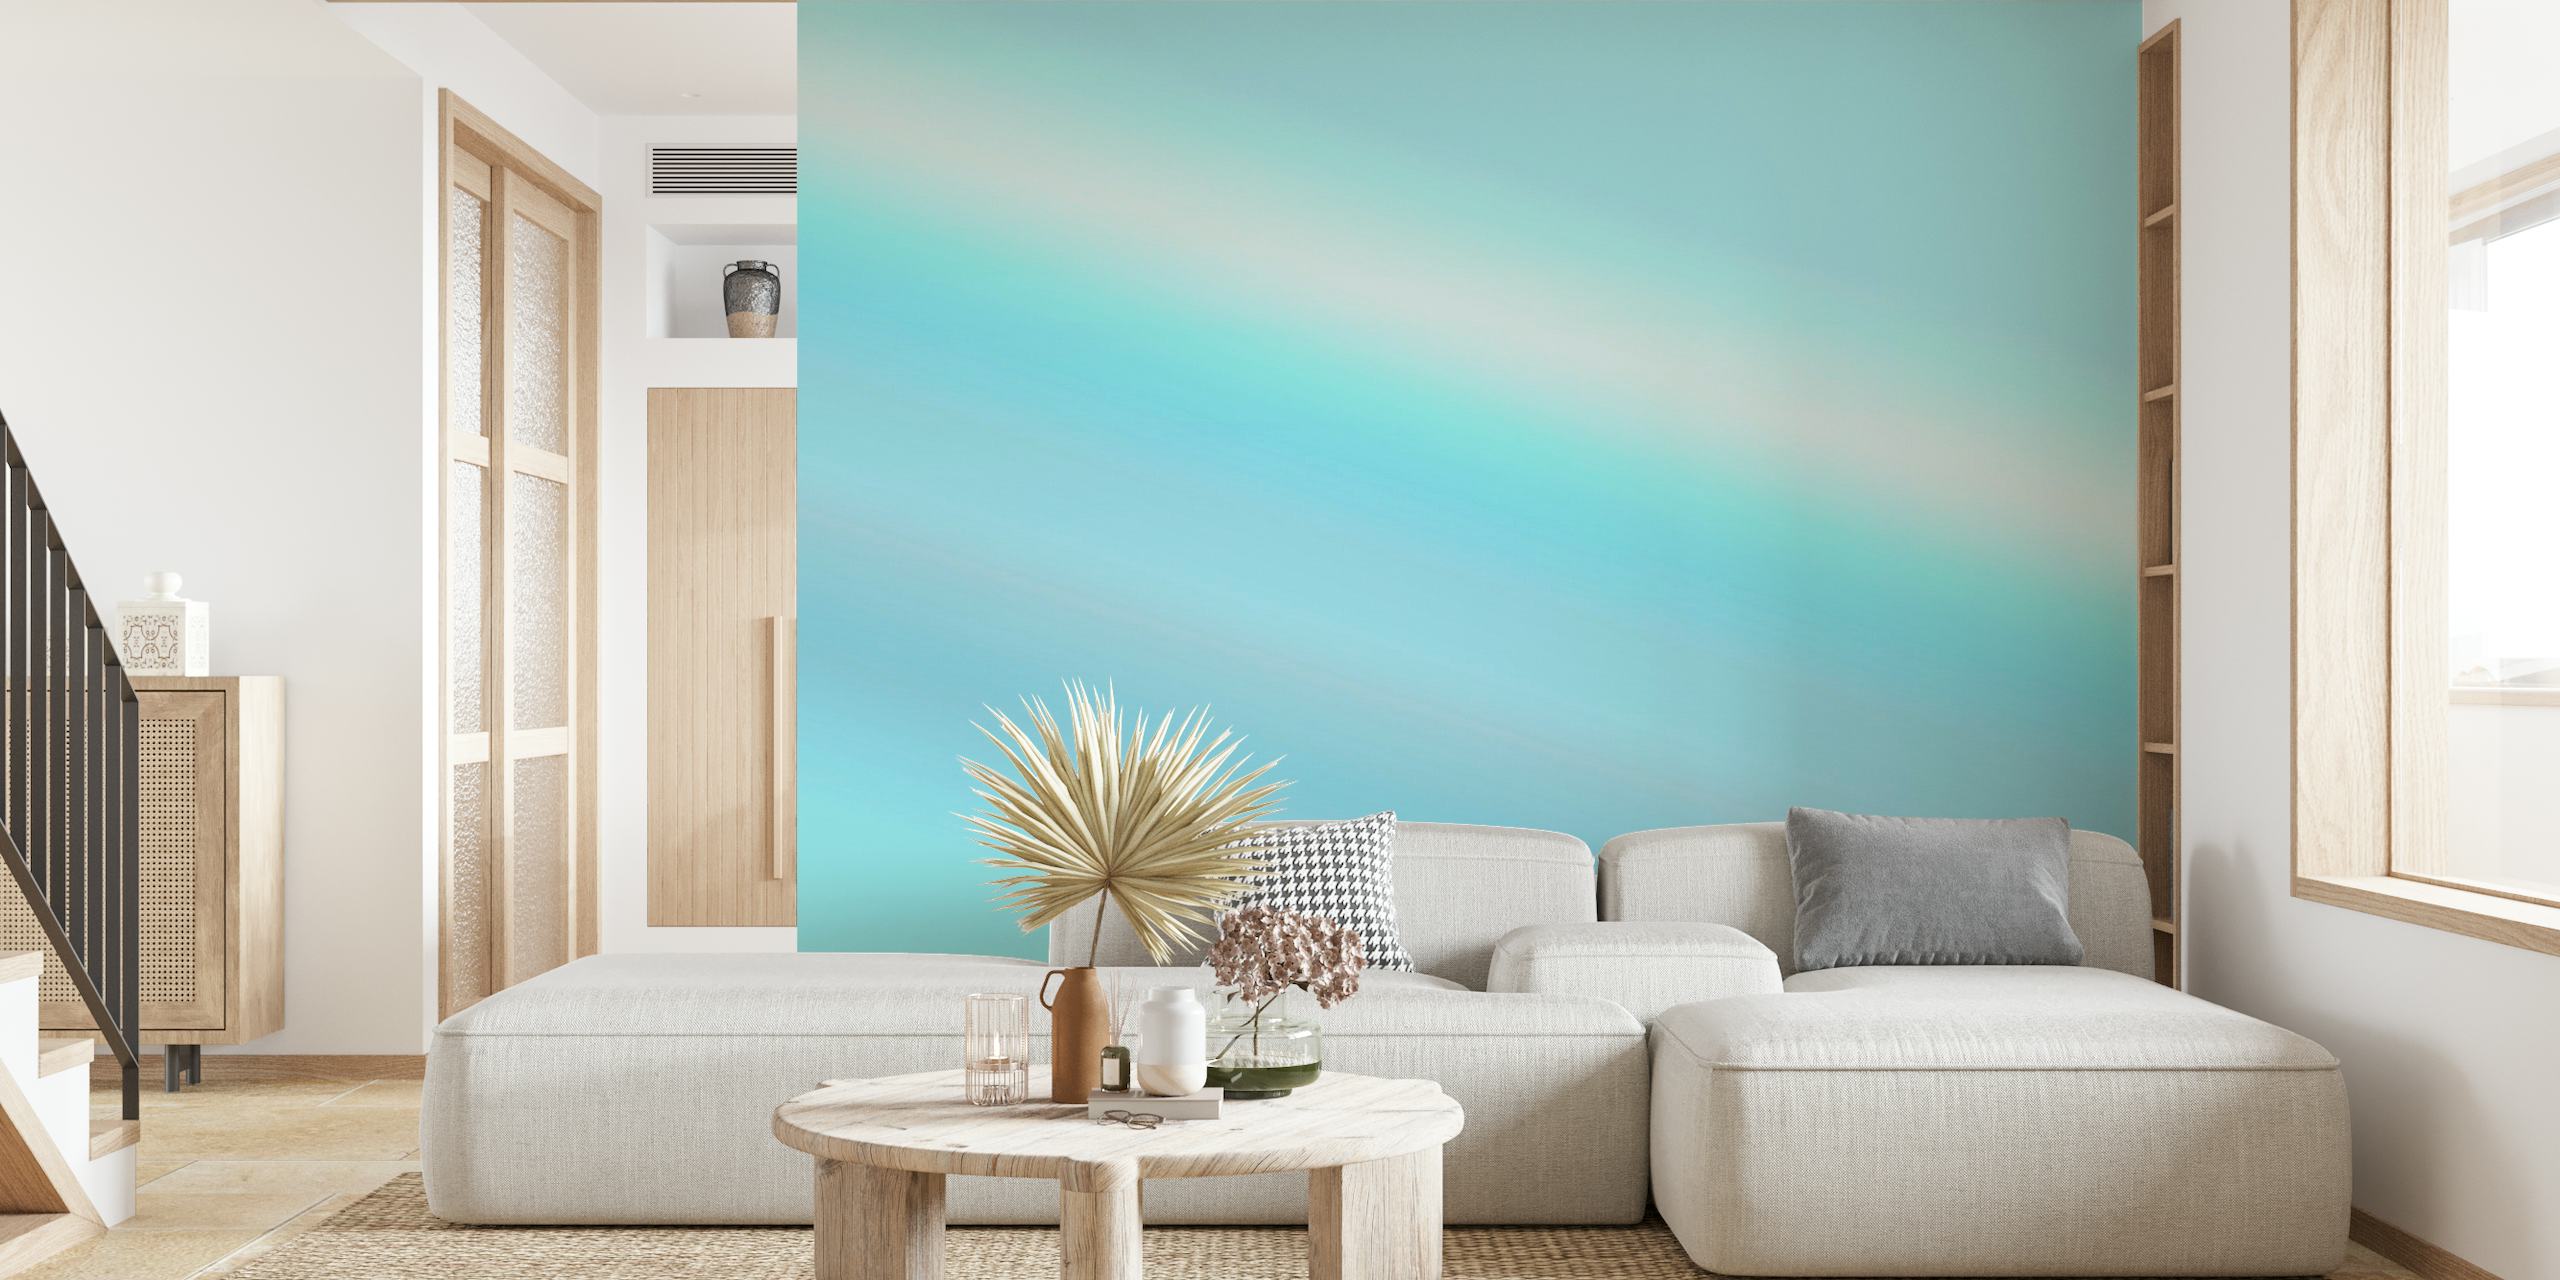 Abstract blue gradient wall mural transitioning from dark to light blue, evoking a peaceful sky